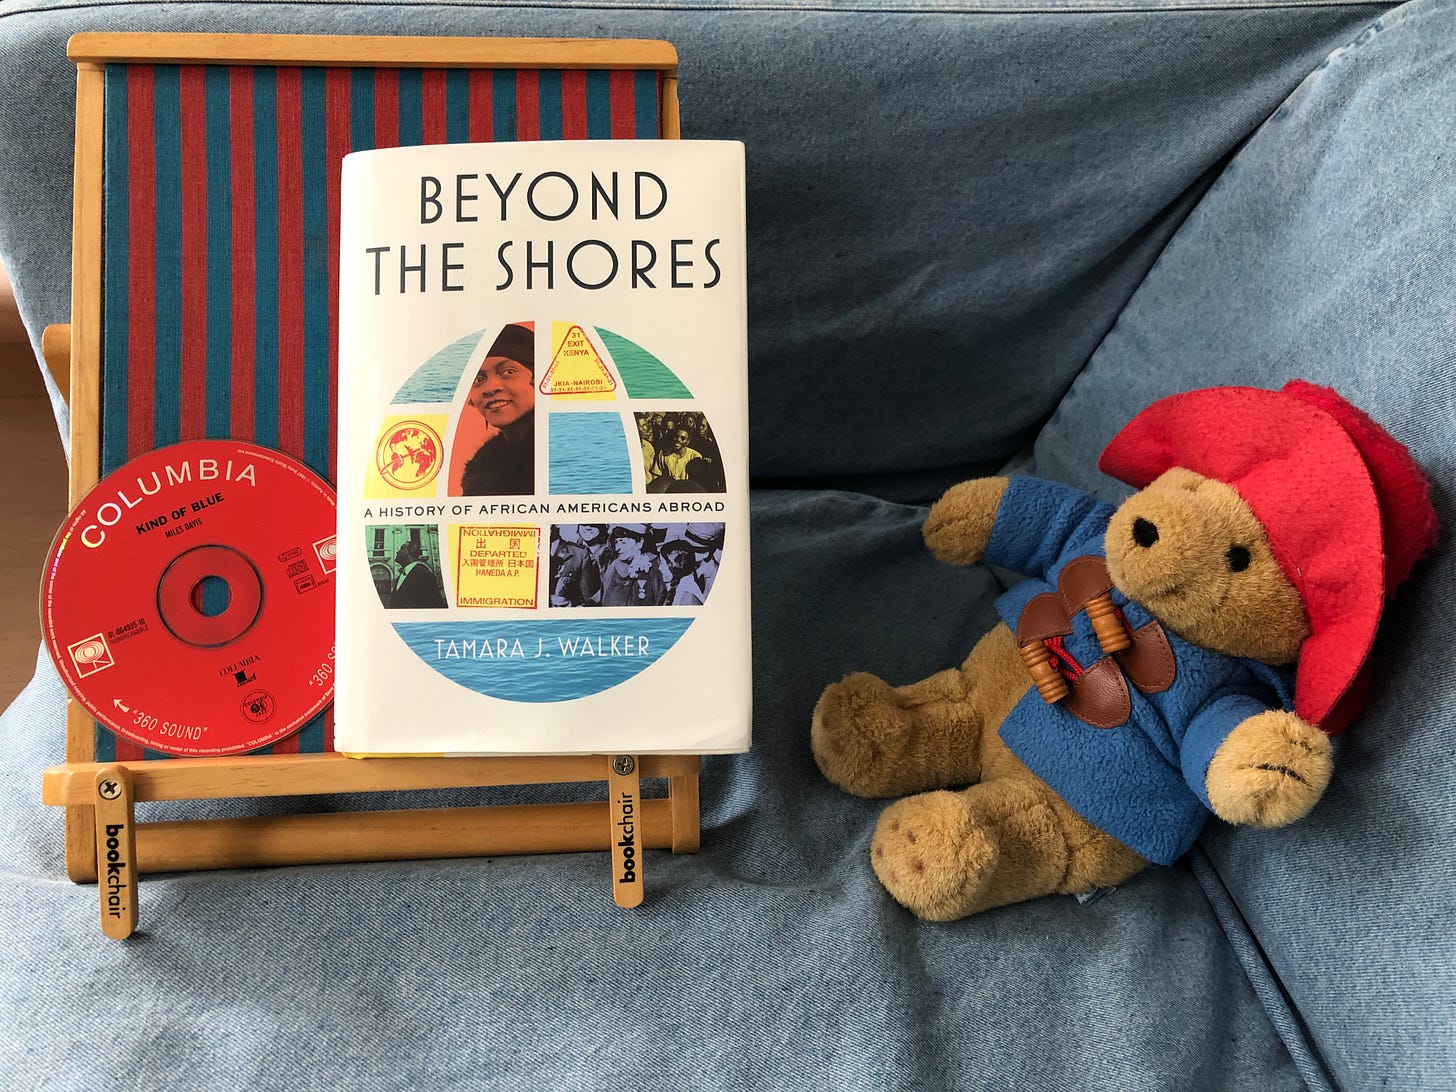 A CD (Miles Davis’s Kind of Blue) and a hardback book (Tamara J. Walker’s Beyond the Shores) sit on a bookchair next to a Paddington Bear teddy bear in a duffle coat and brimmed hat. The ensemble perches on the corner of a couch.